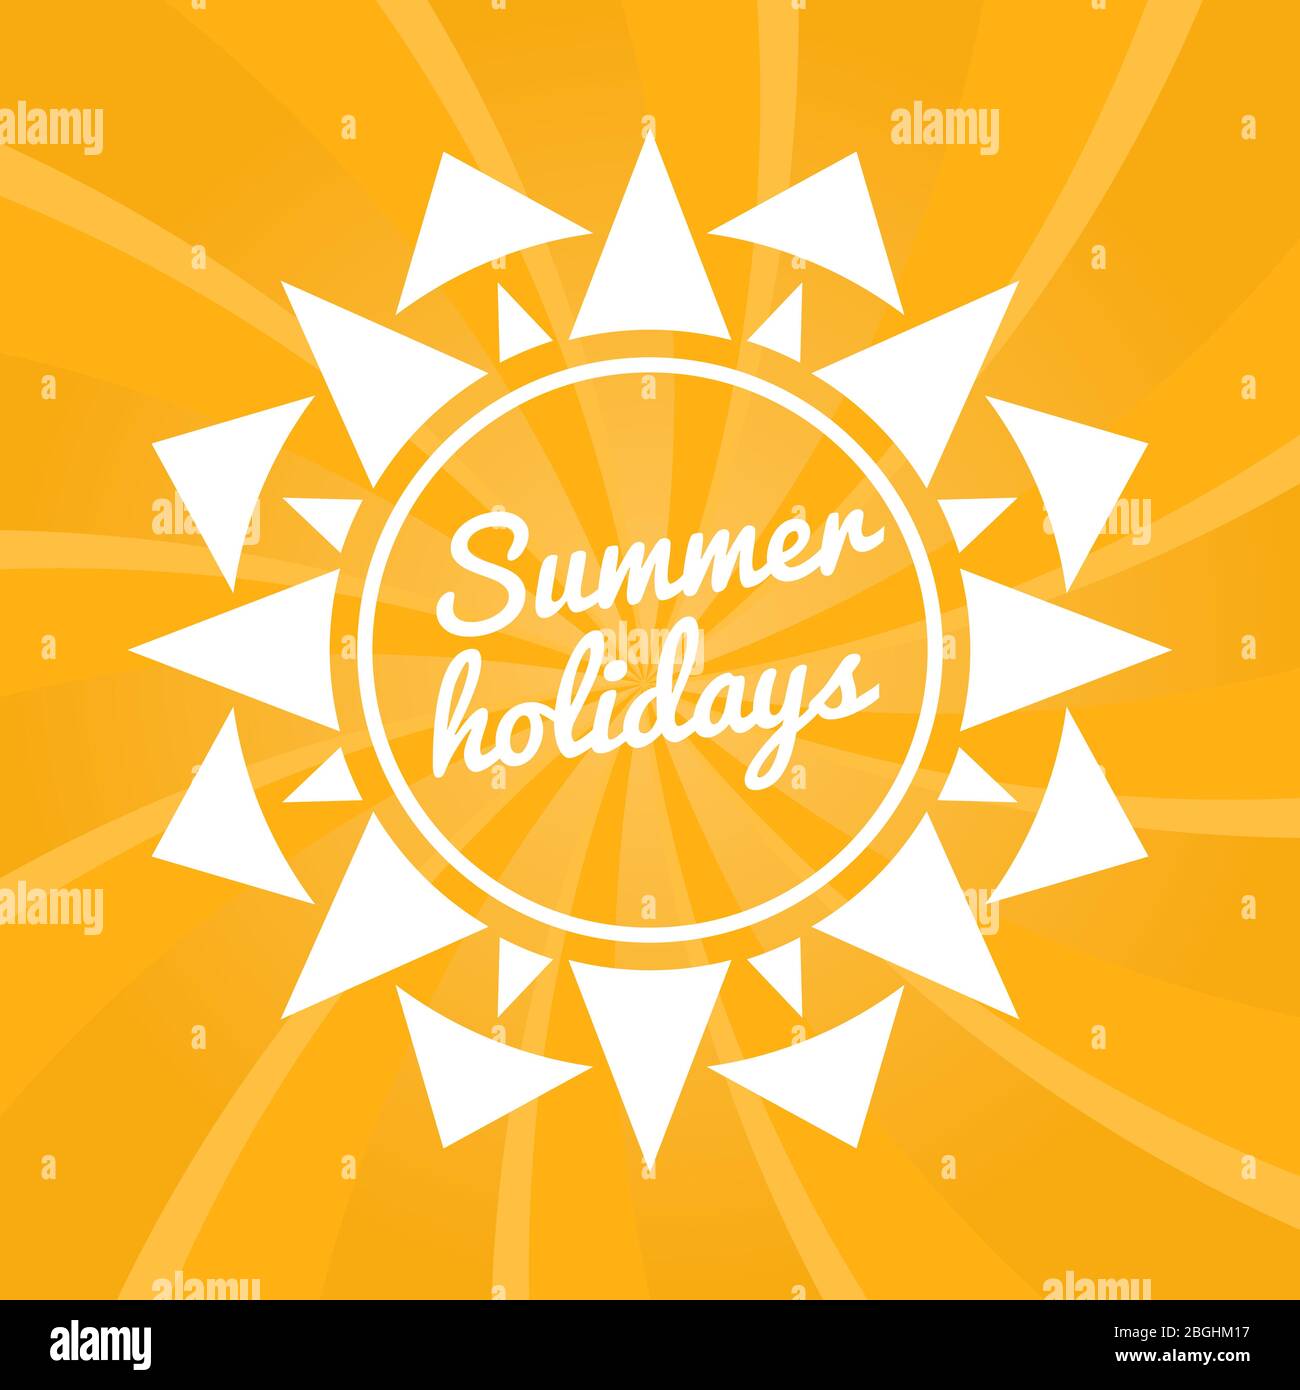 Summer holidays sign with sun. Bright summer background. Vector